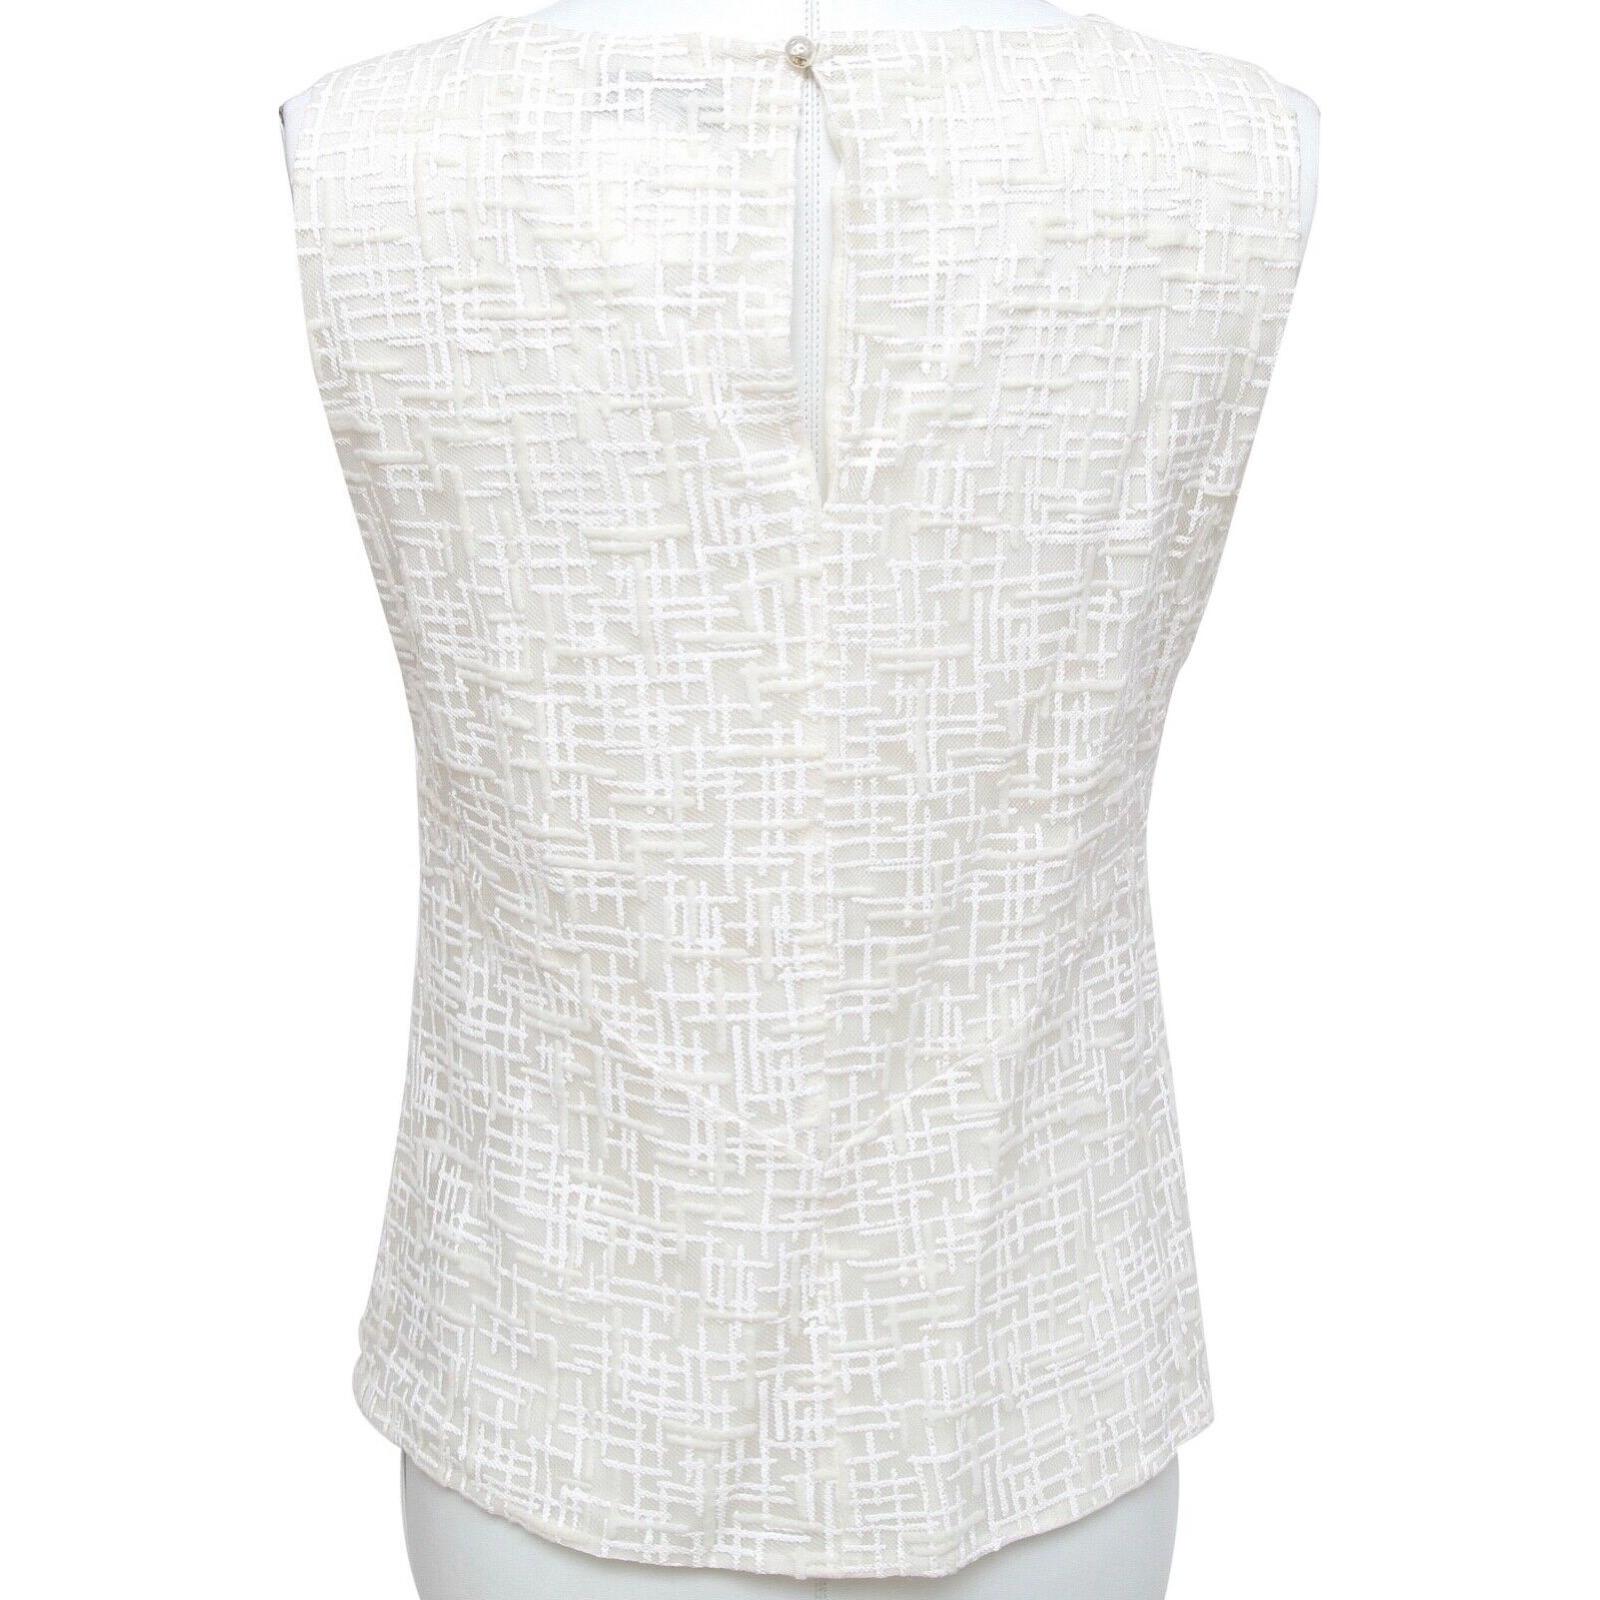 CHANEL Blouse Top Shirt Ivory Sleeveless CC Faux Pearl Button Sz 40 2012 For Sale 1